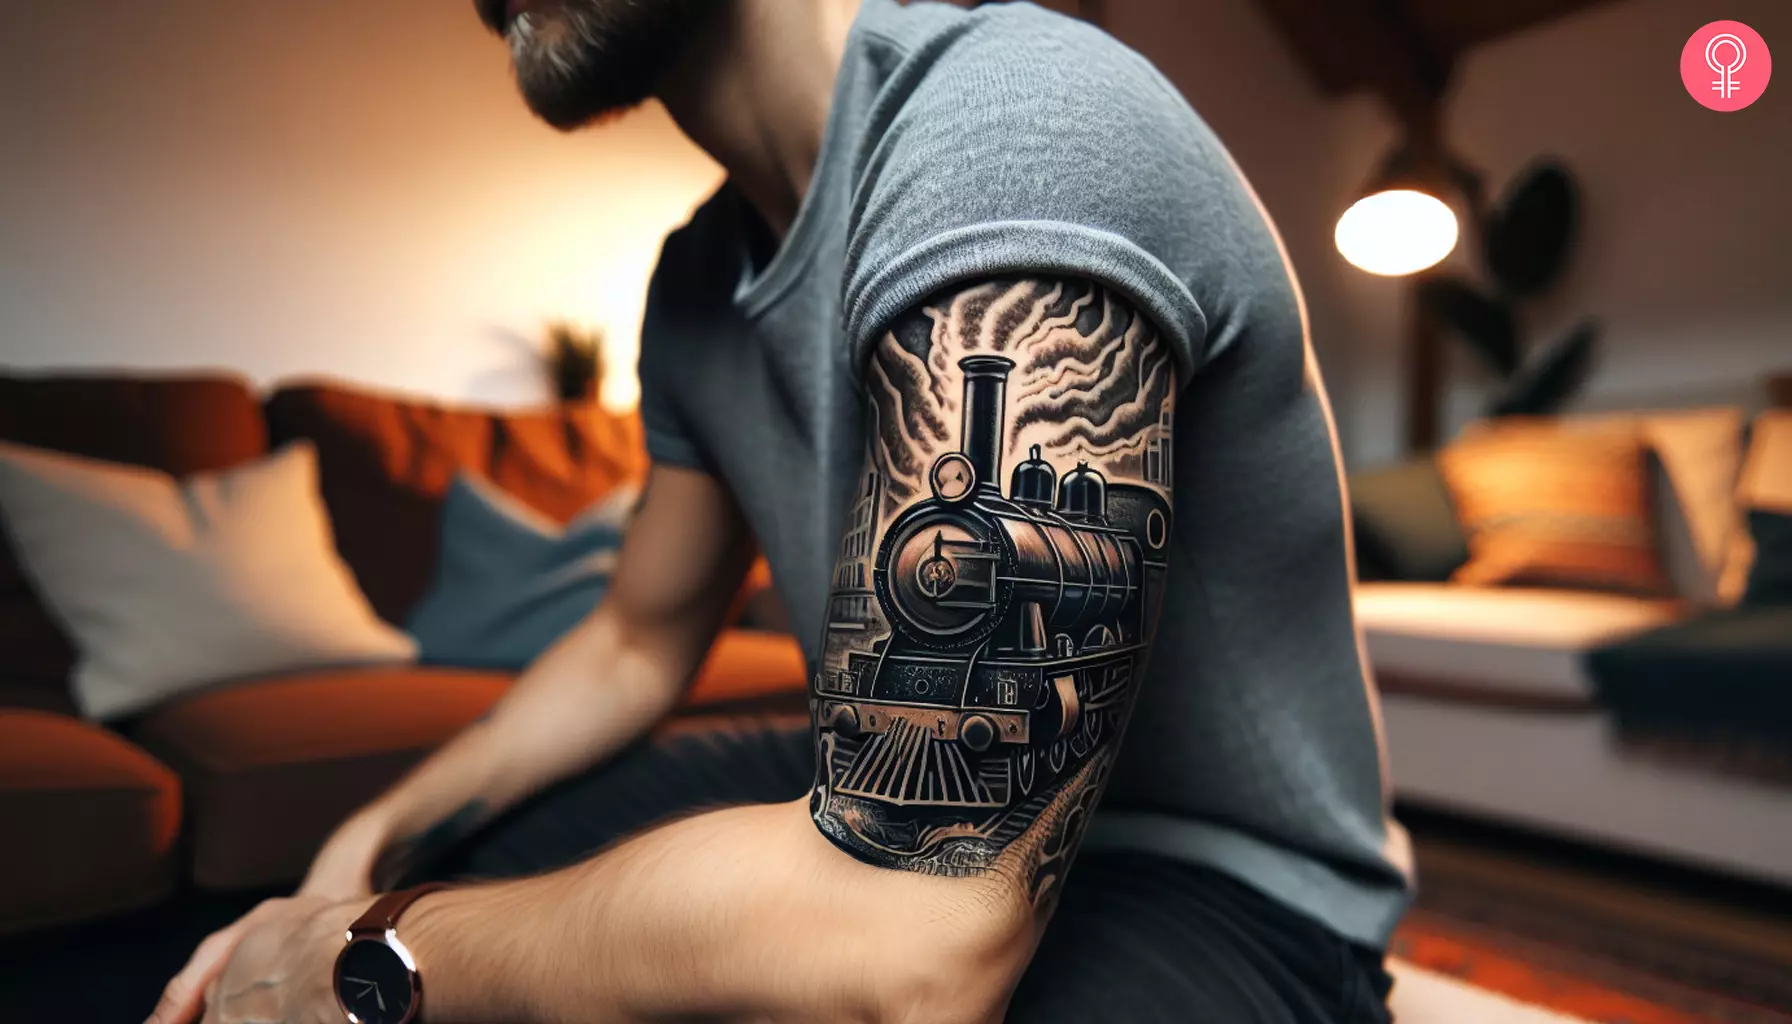 A traditional train tattoo sleeve on the upper arm